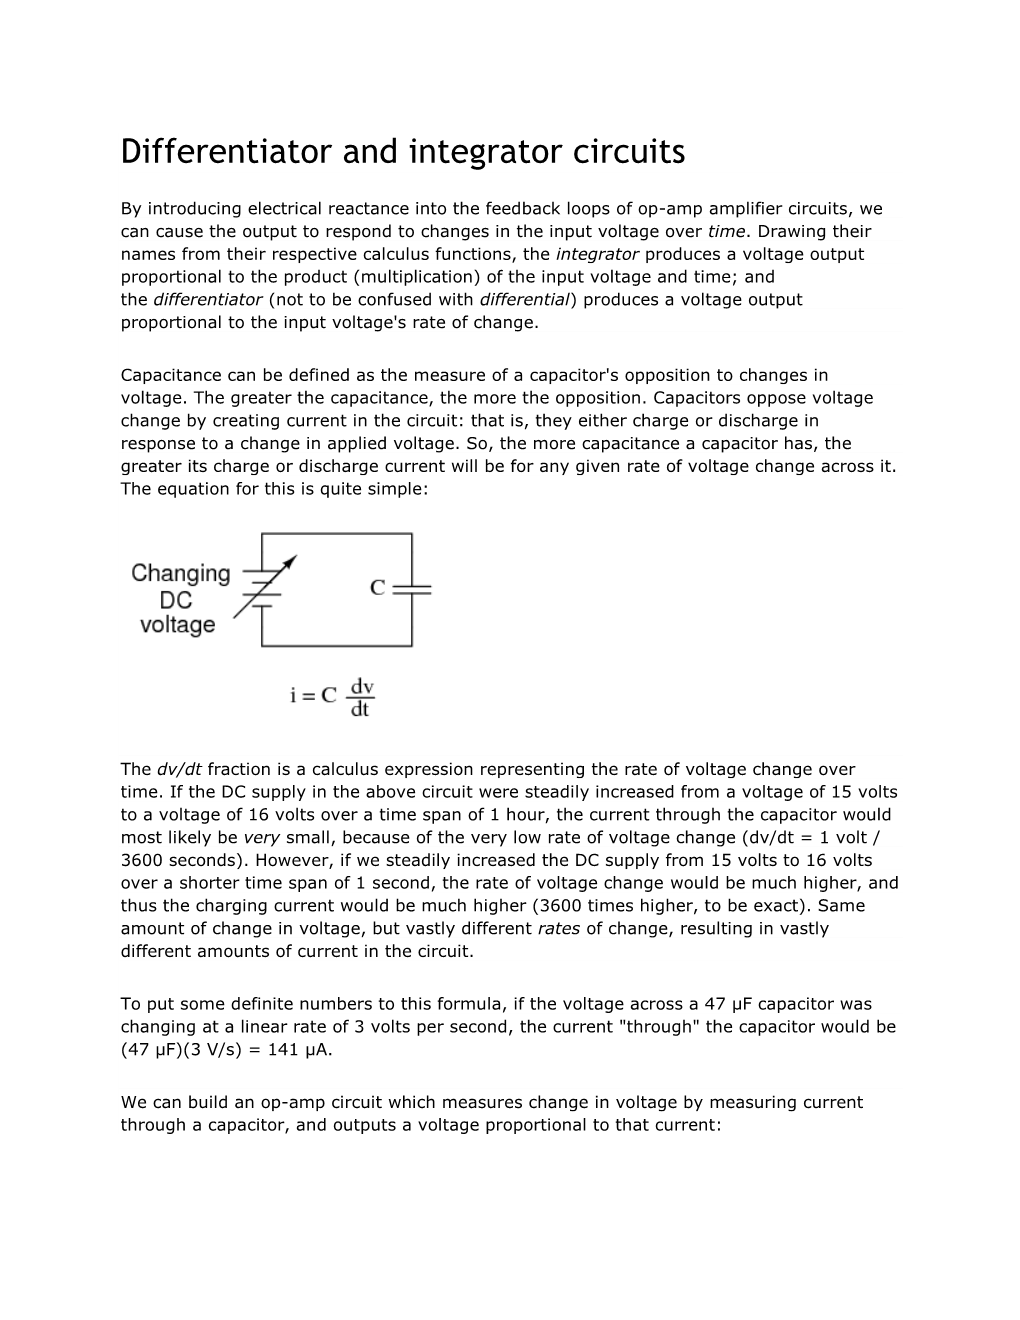 Differentiator and Integrator Circuits